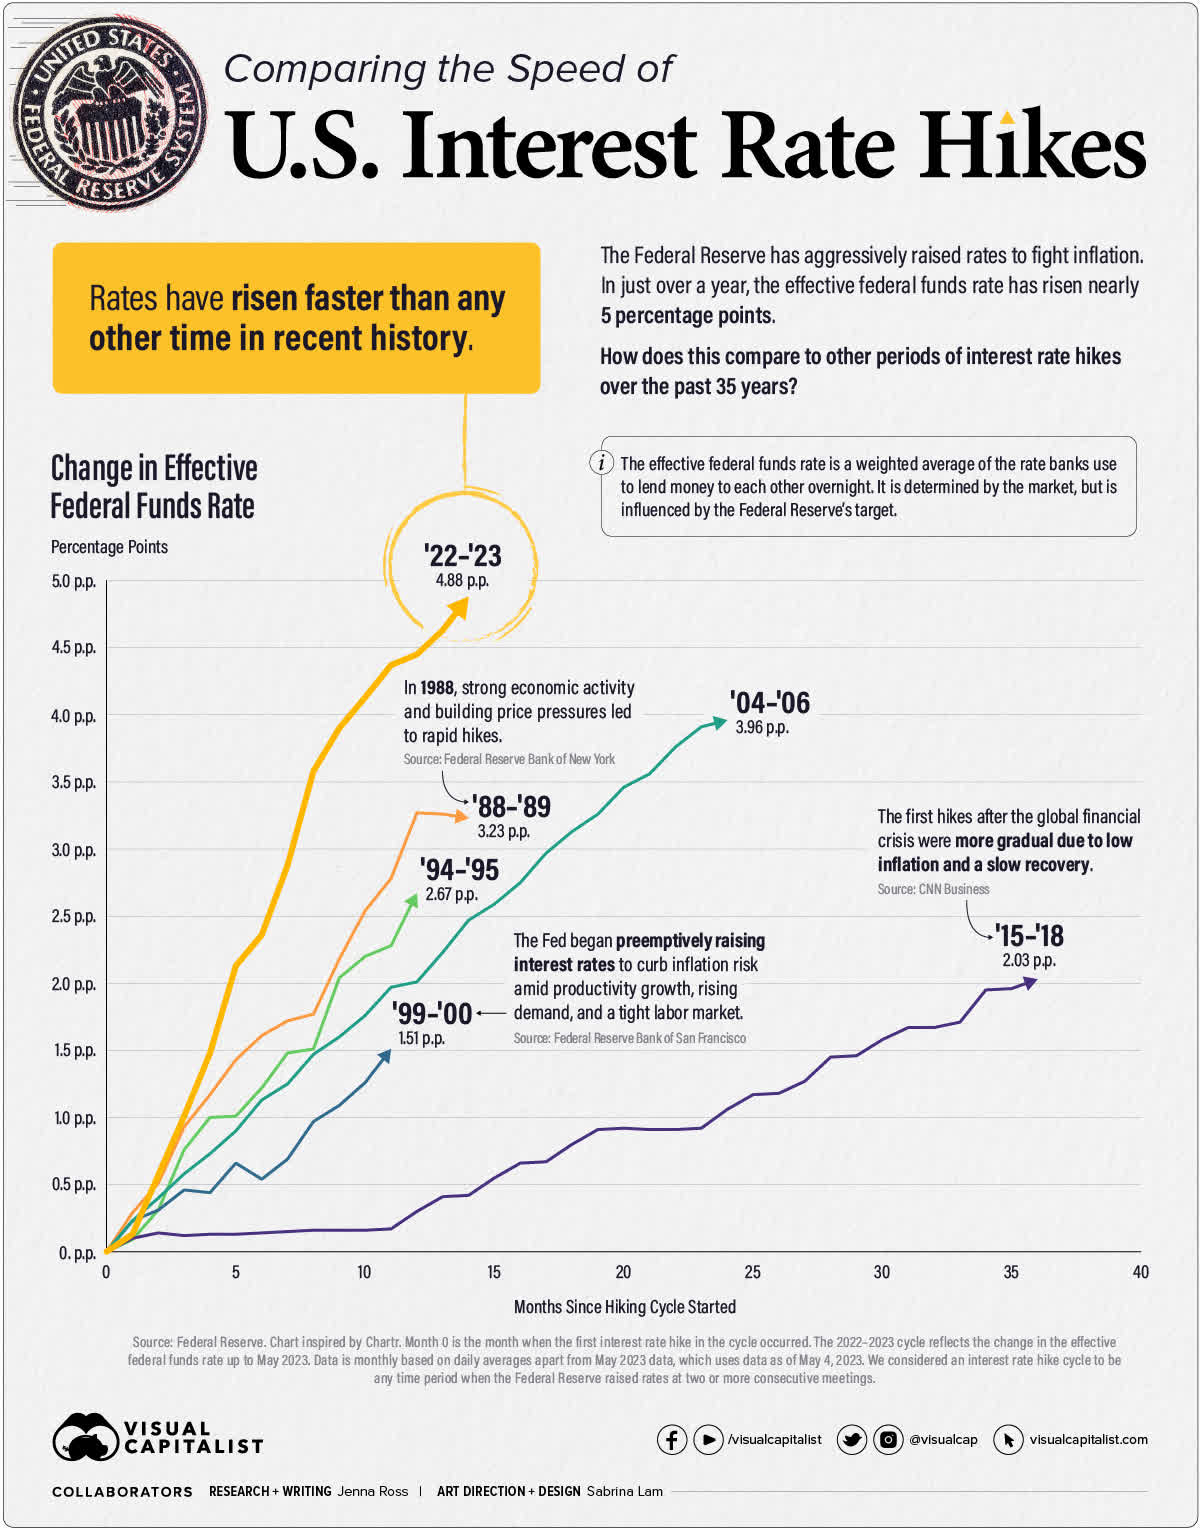 Interest Rate Hikes: Comparing Their Speed from 1988-2023